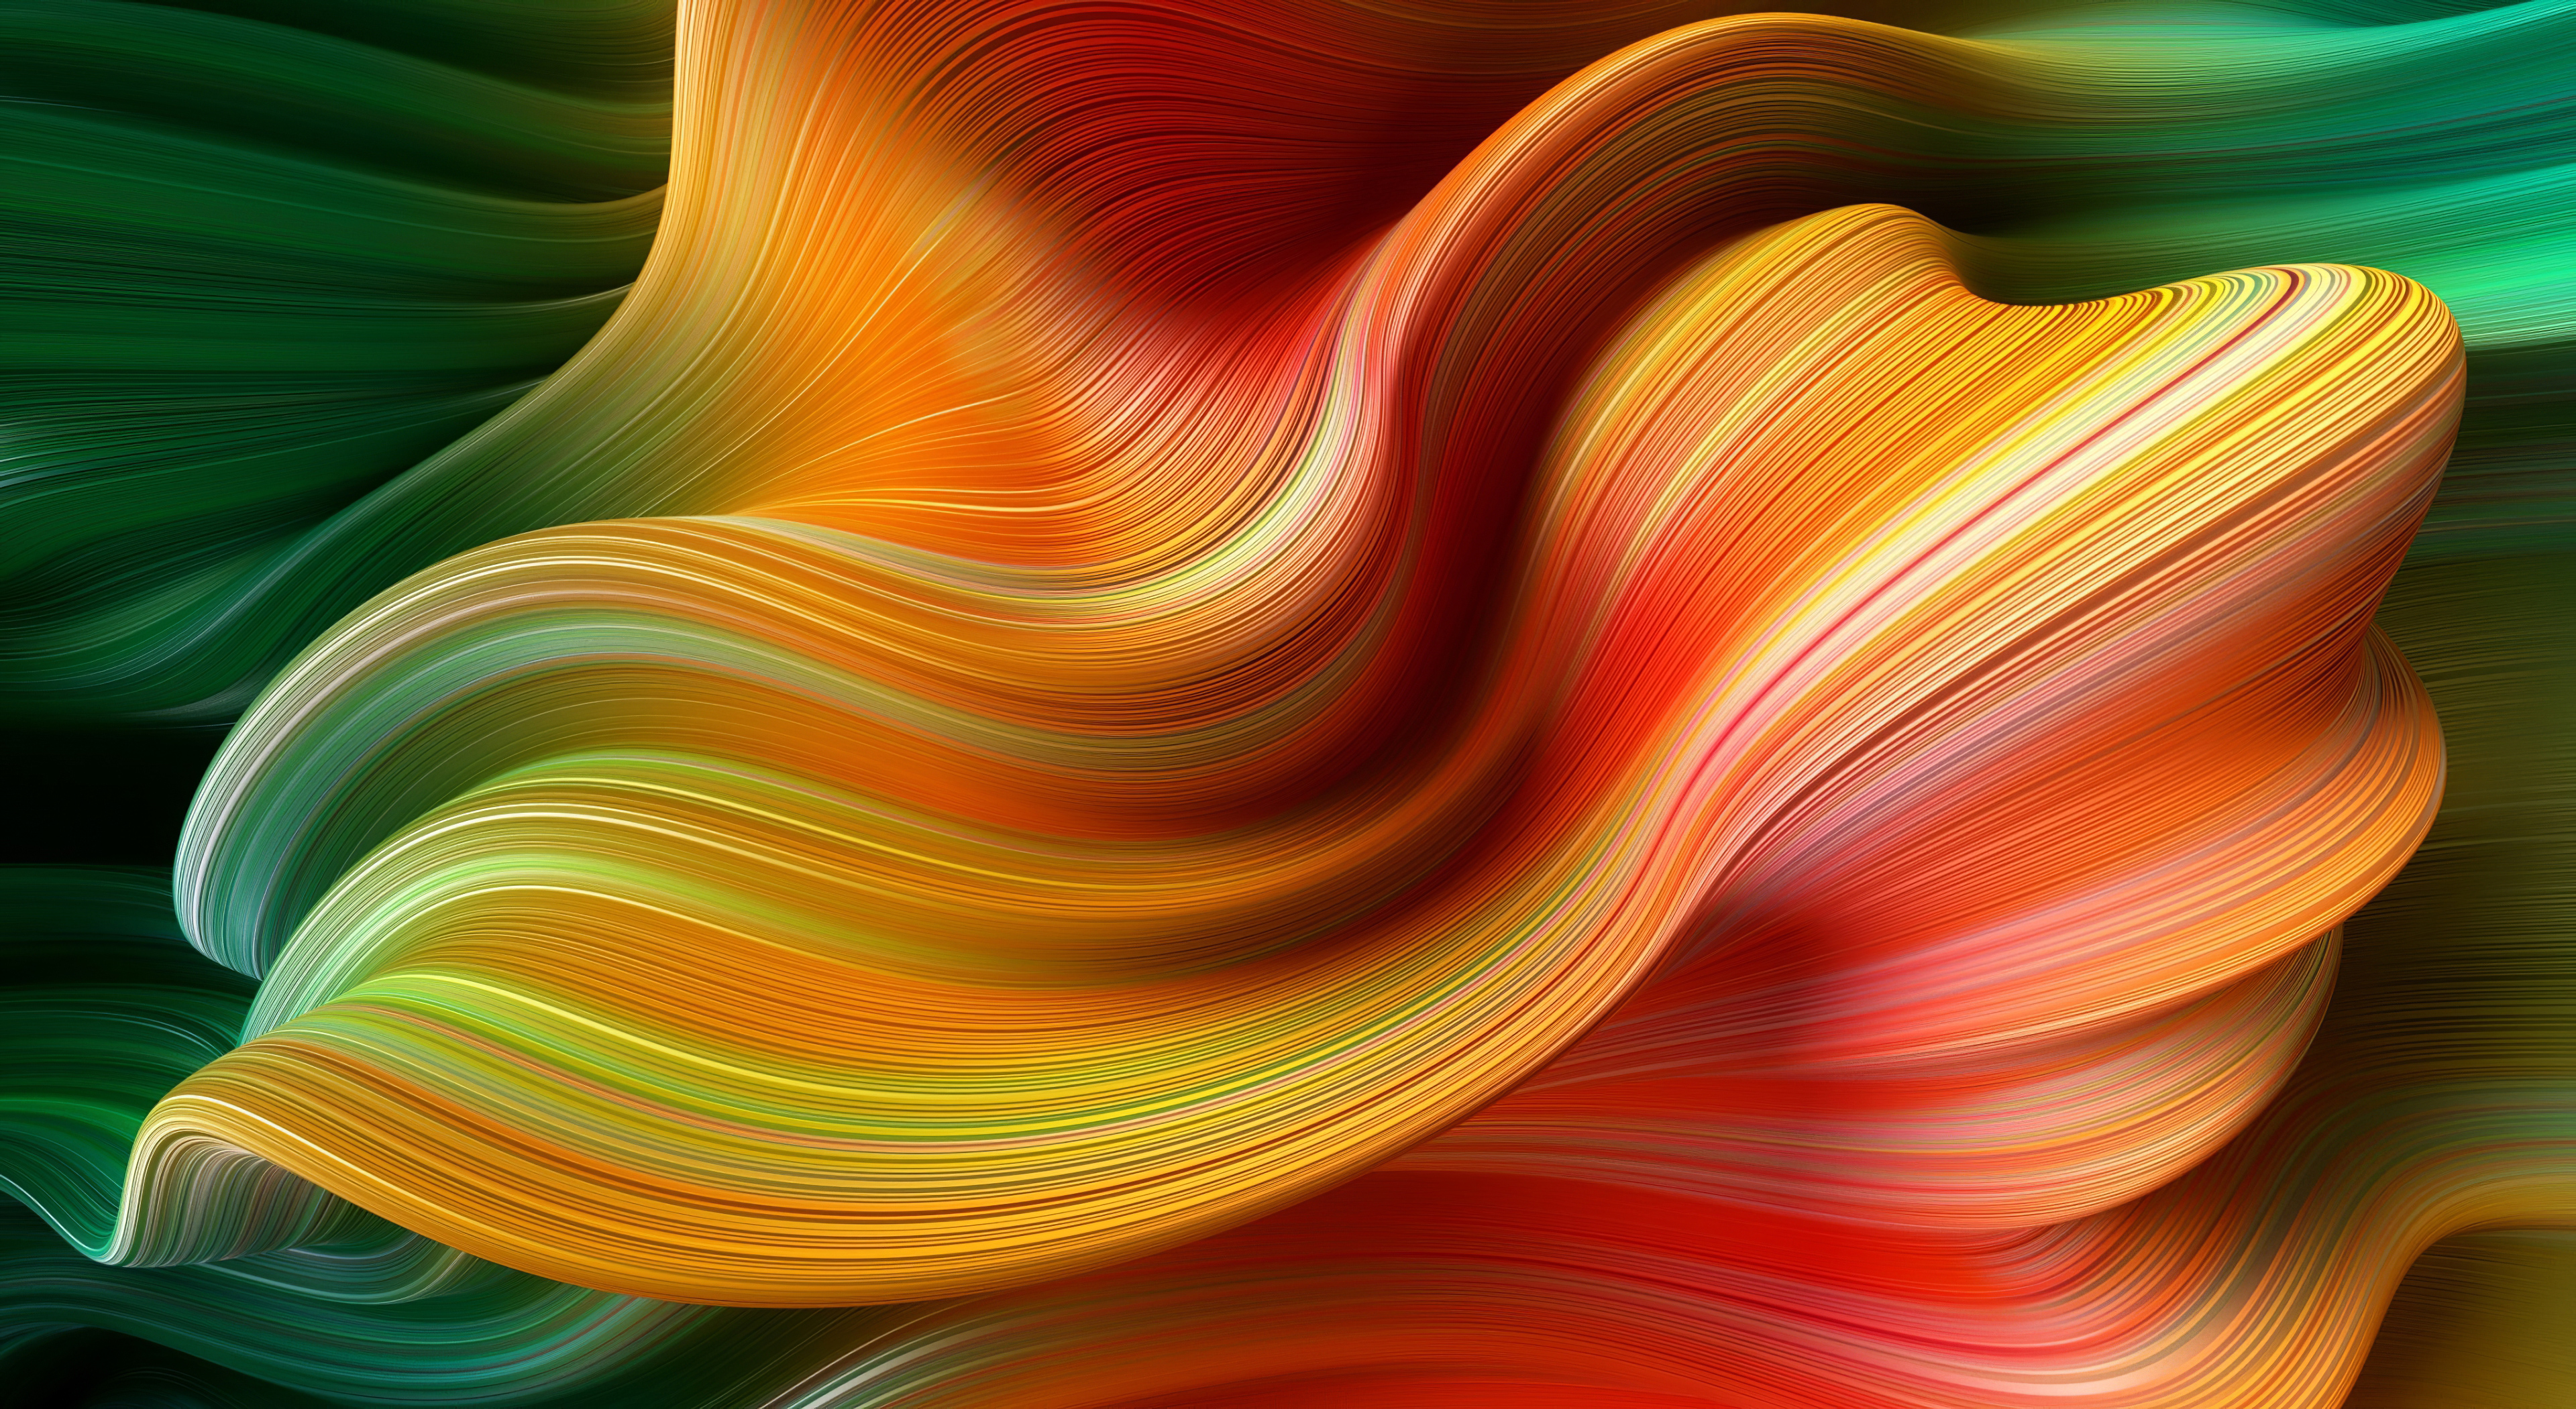 Colorful Shapes Art Wallpapers